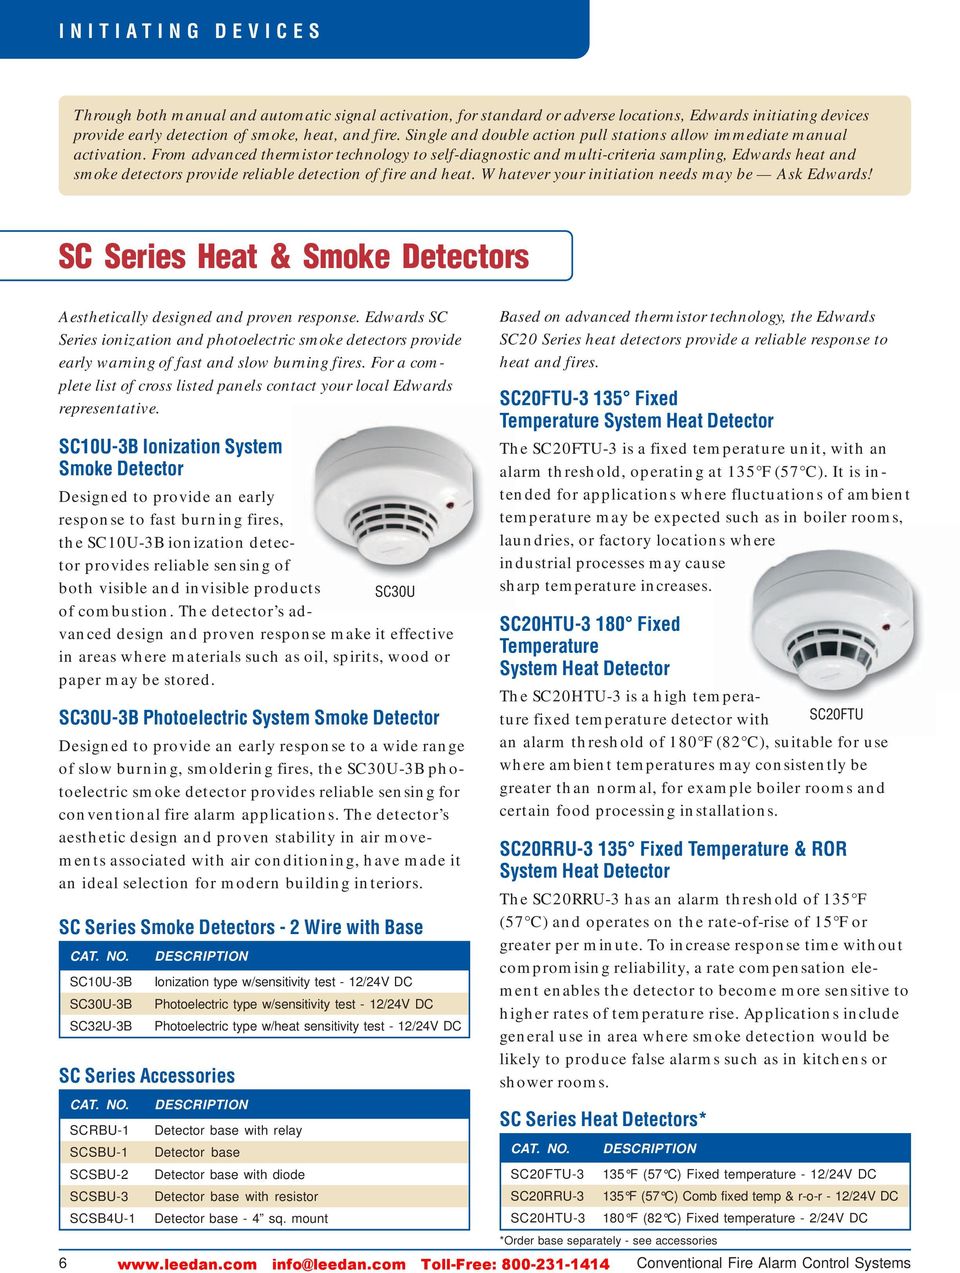 From advanced thermistor technology to self-diagnostic and multi-criteria sampling, Edwards heat and smoke detectors provide reliable detection of fire and heat.